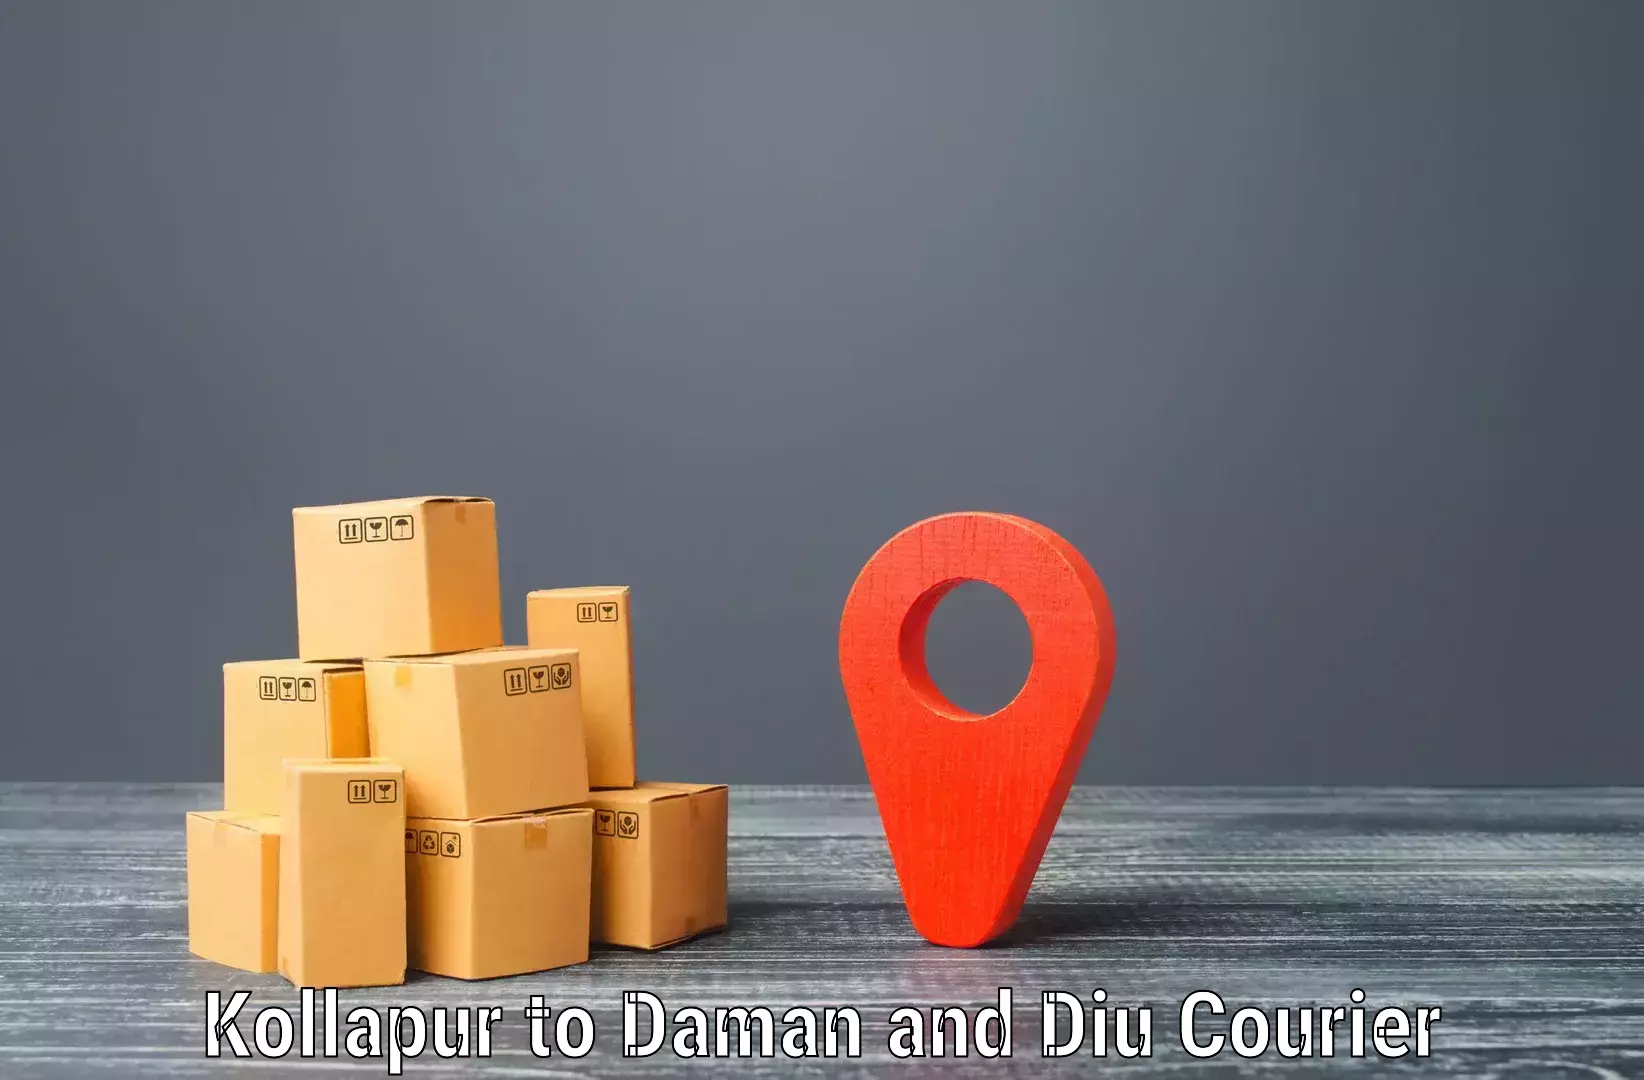 Nationwide delivery network Kollapur to Daman